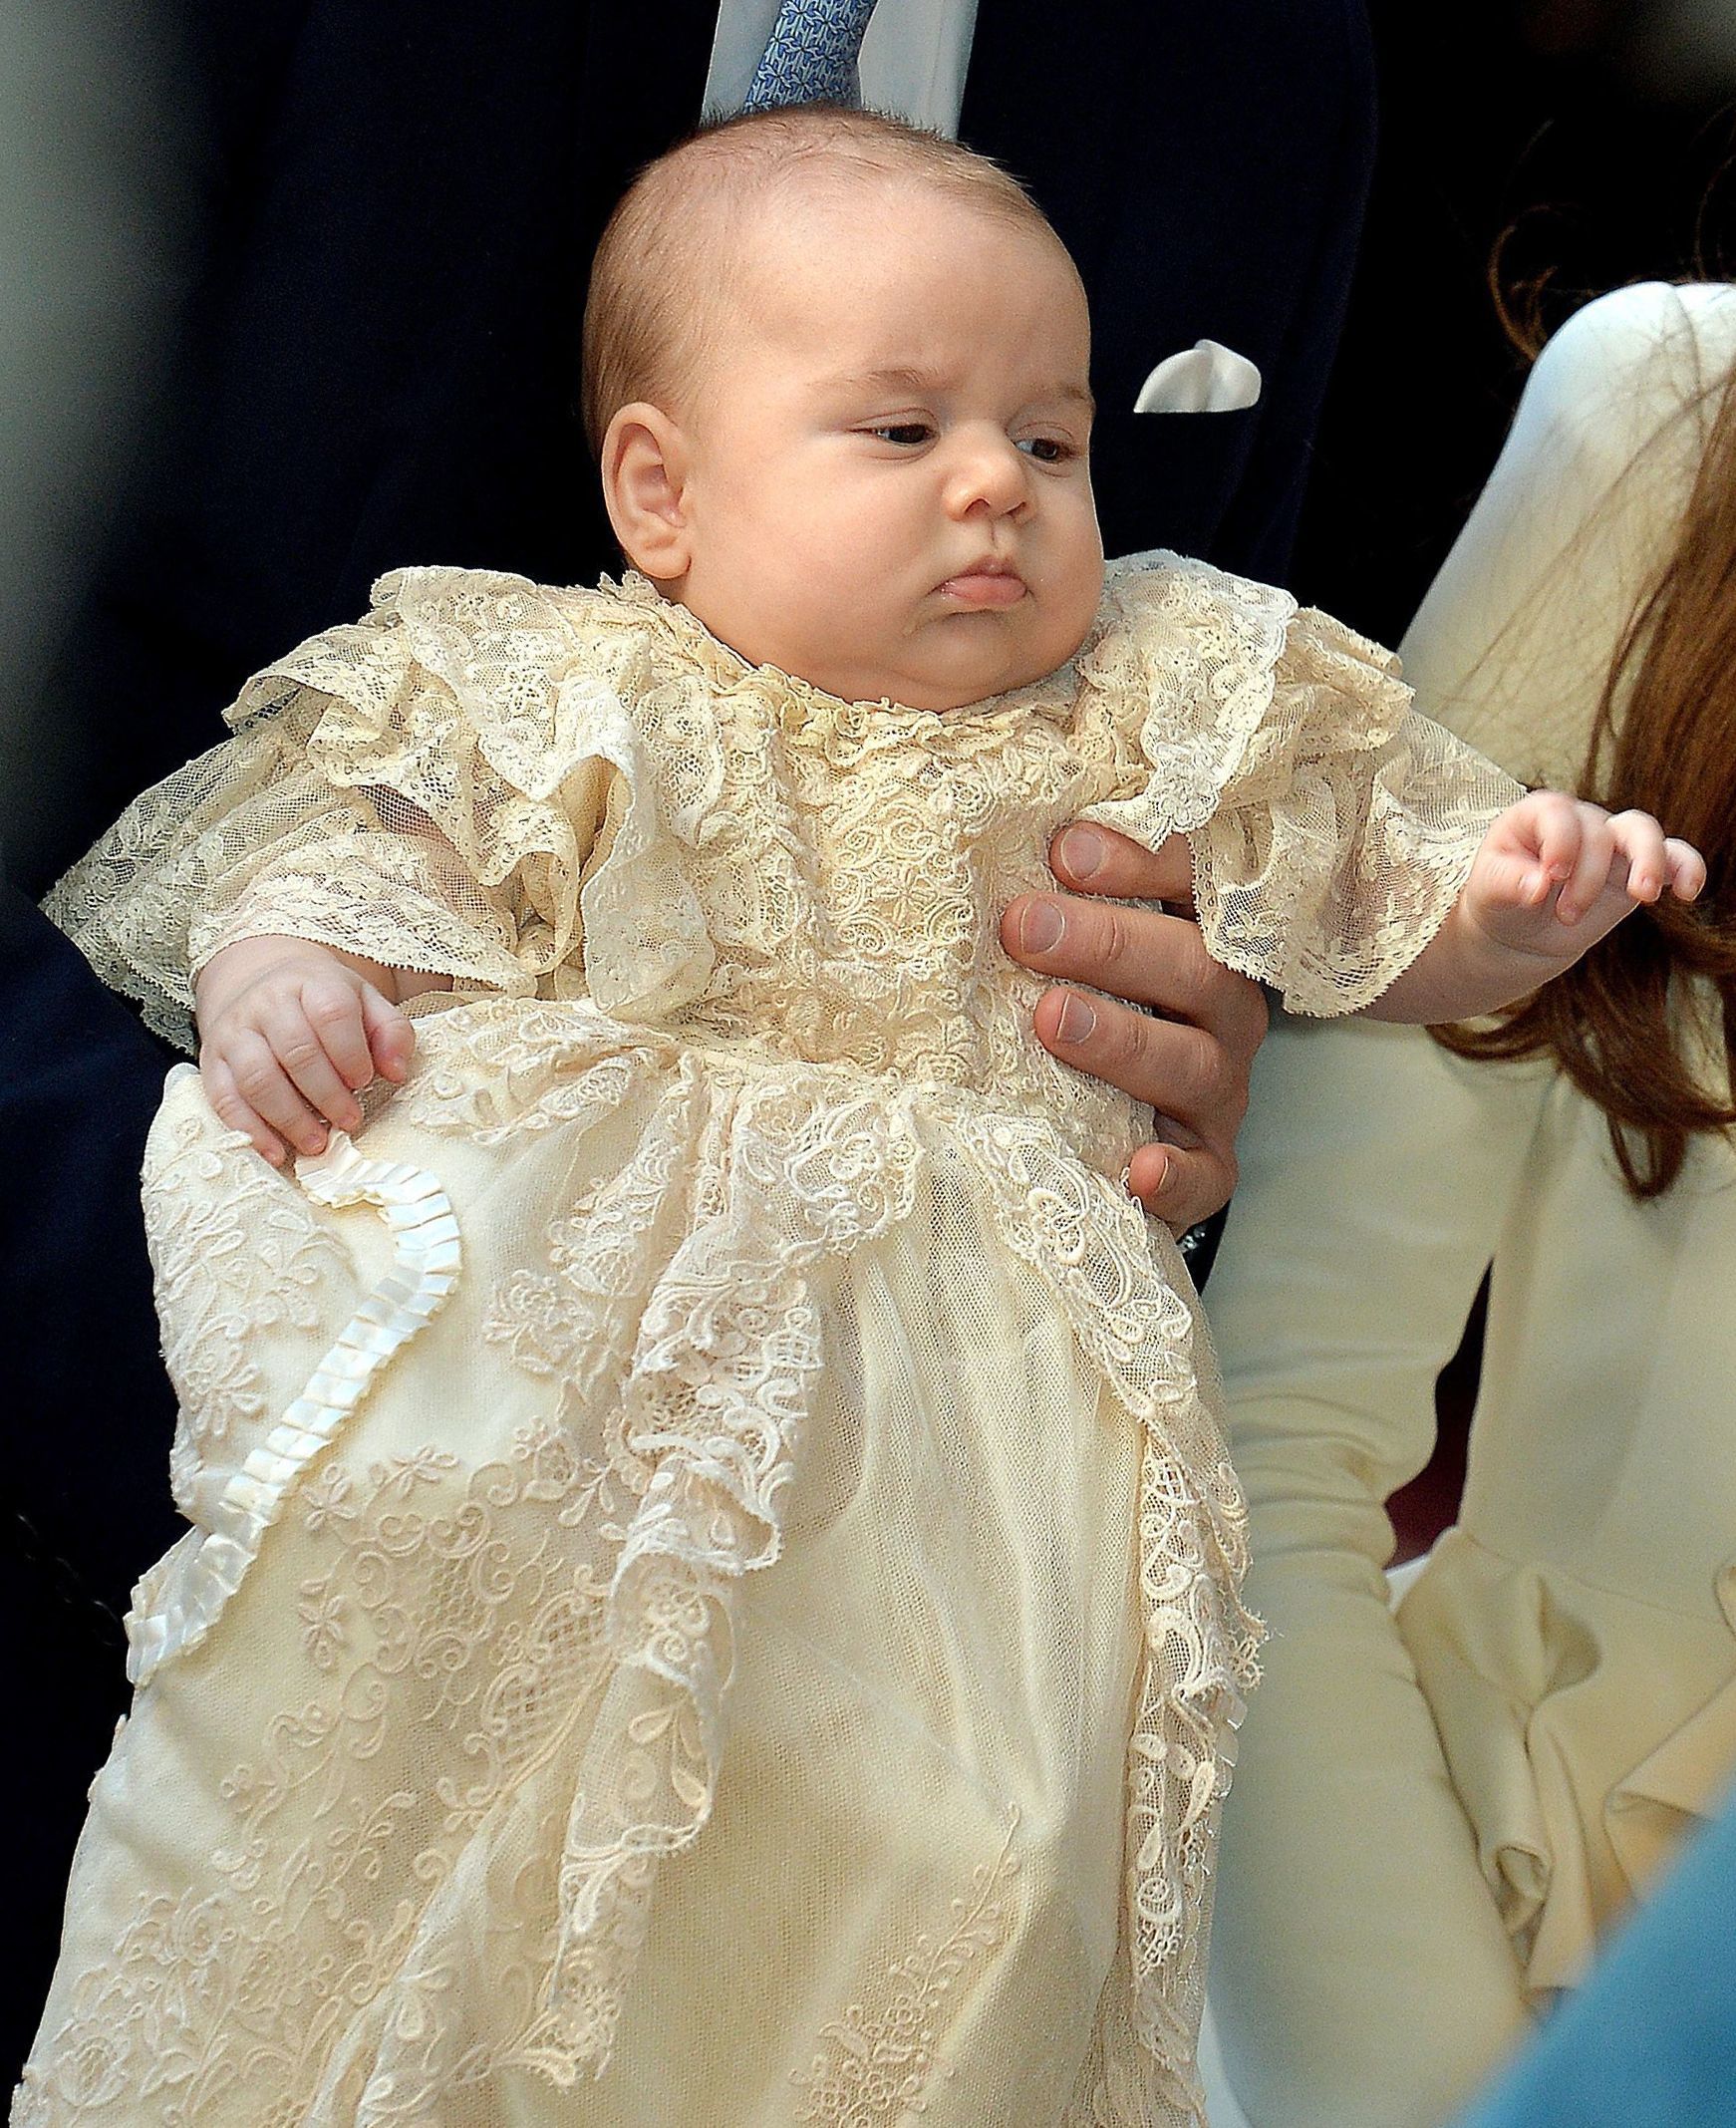 <p>Prince George was a lacy bundle of attitude before his christening at the Chapel Royal at St. James's Palace in London on Oct. 23, 2013.</p>